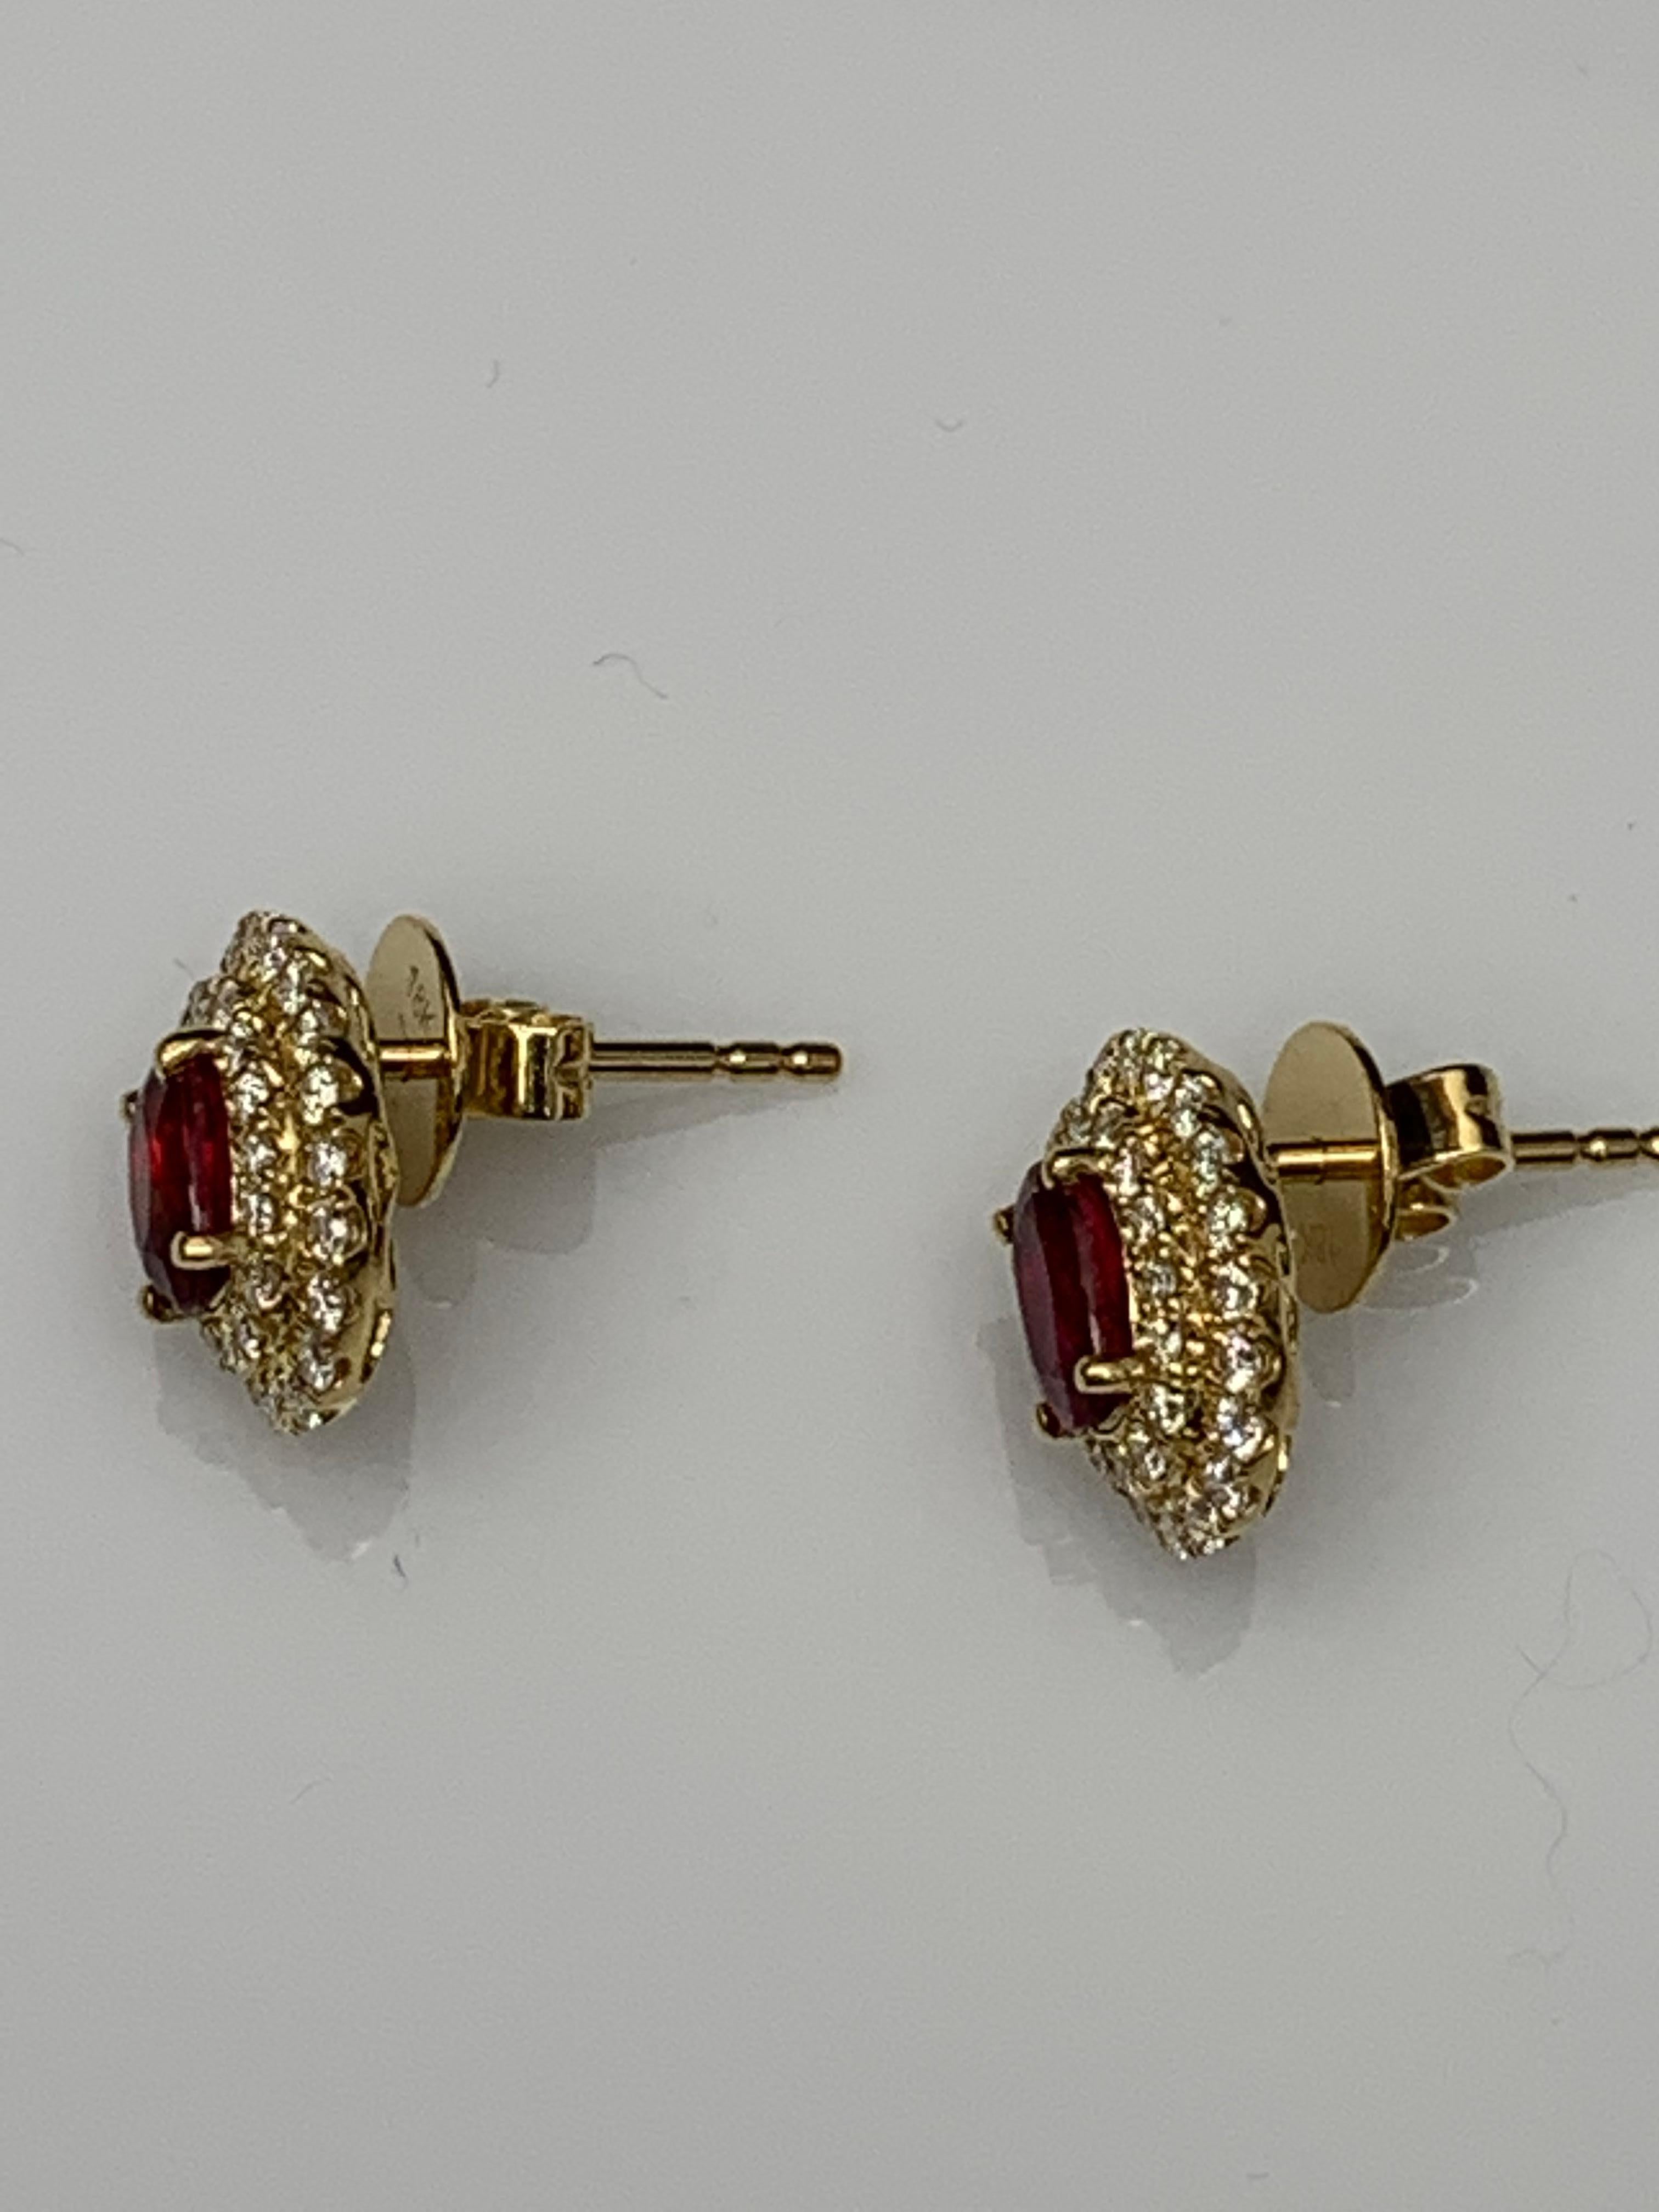 0.98 Carat Oval Cut Ruby and Diamond Stud Earrings in 18K Yellow Gold For Sale 2